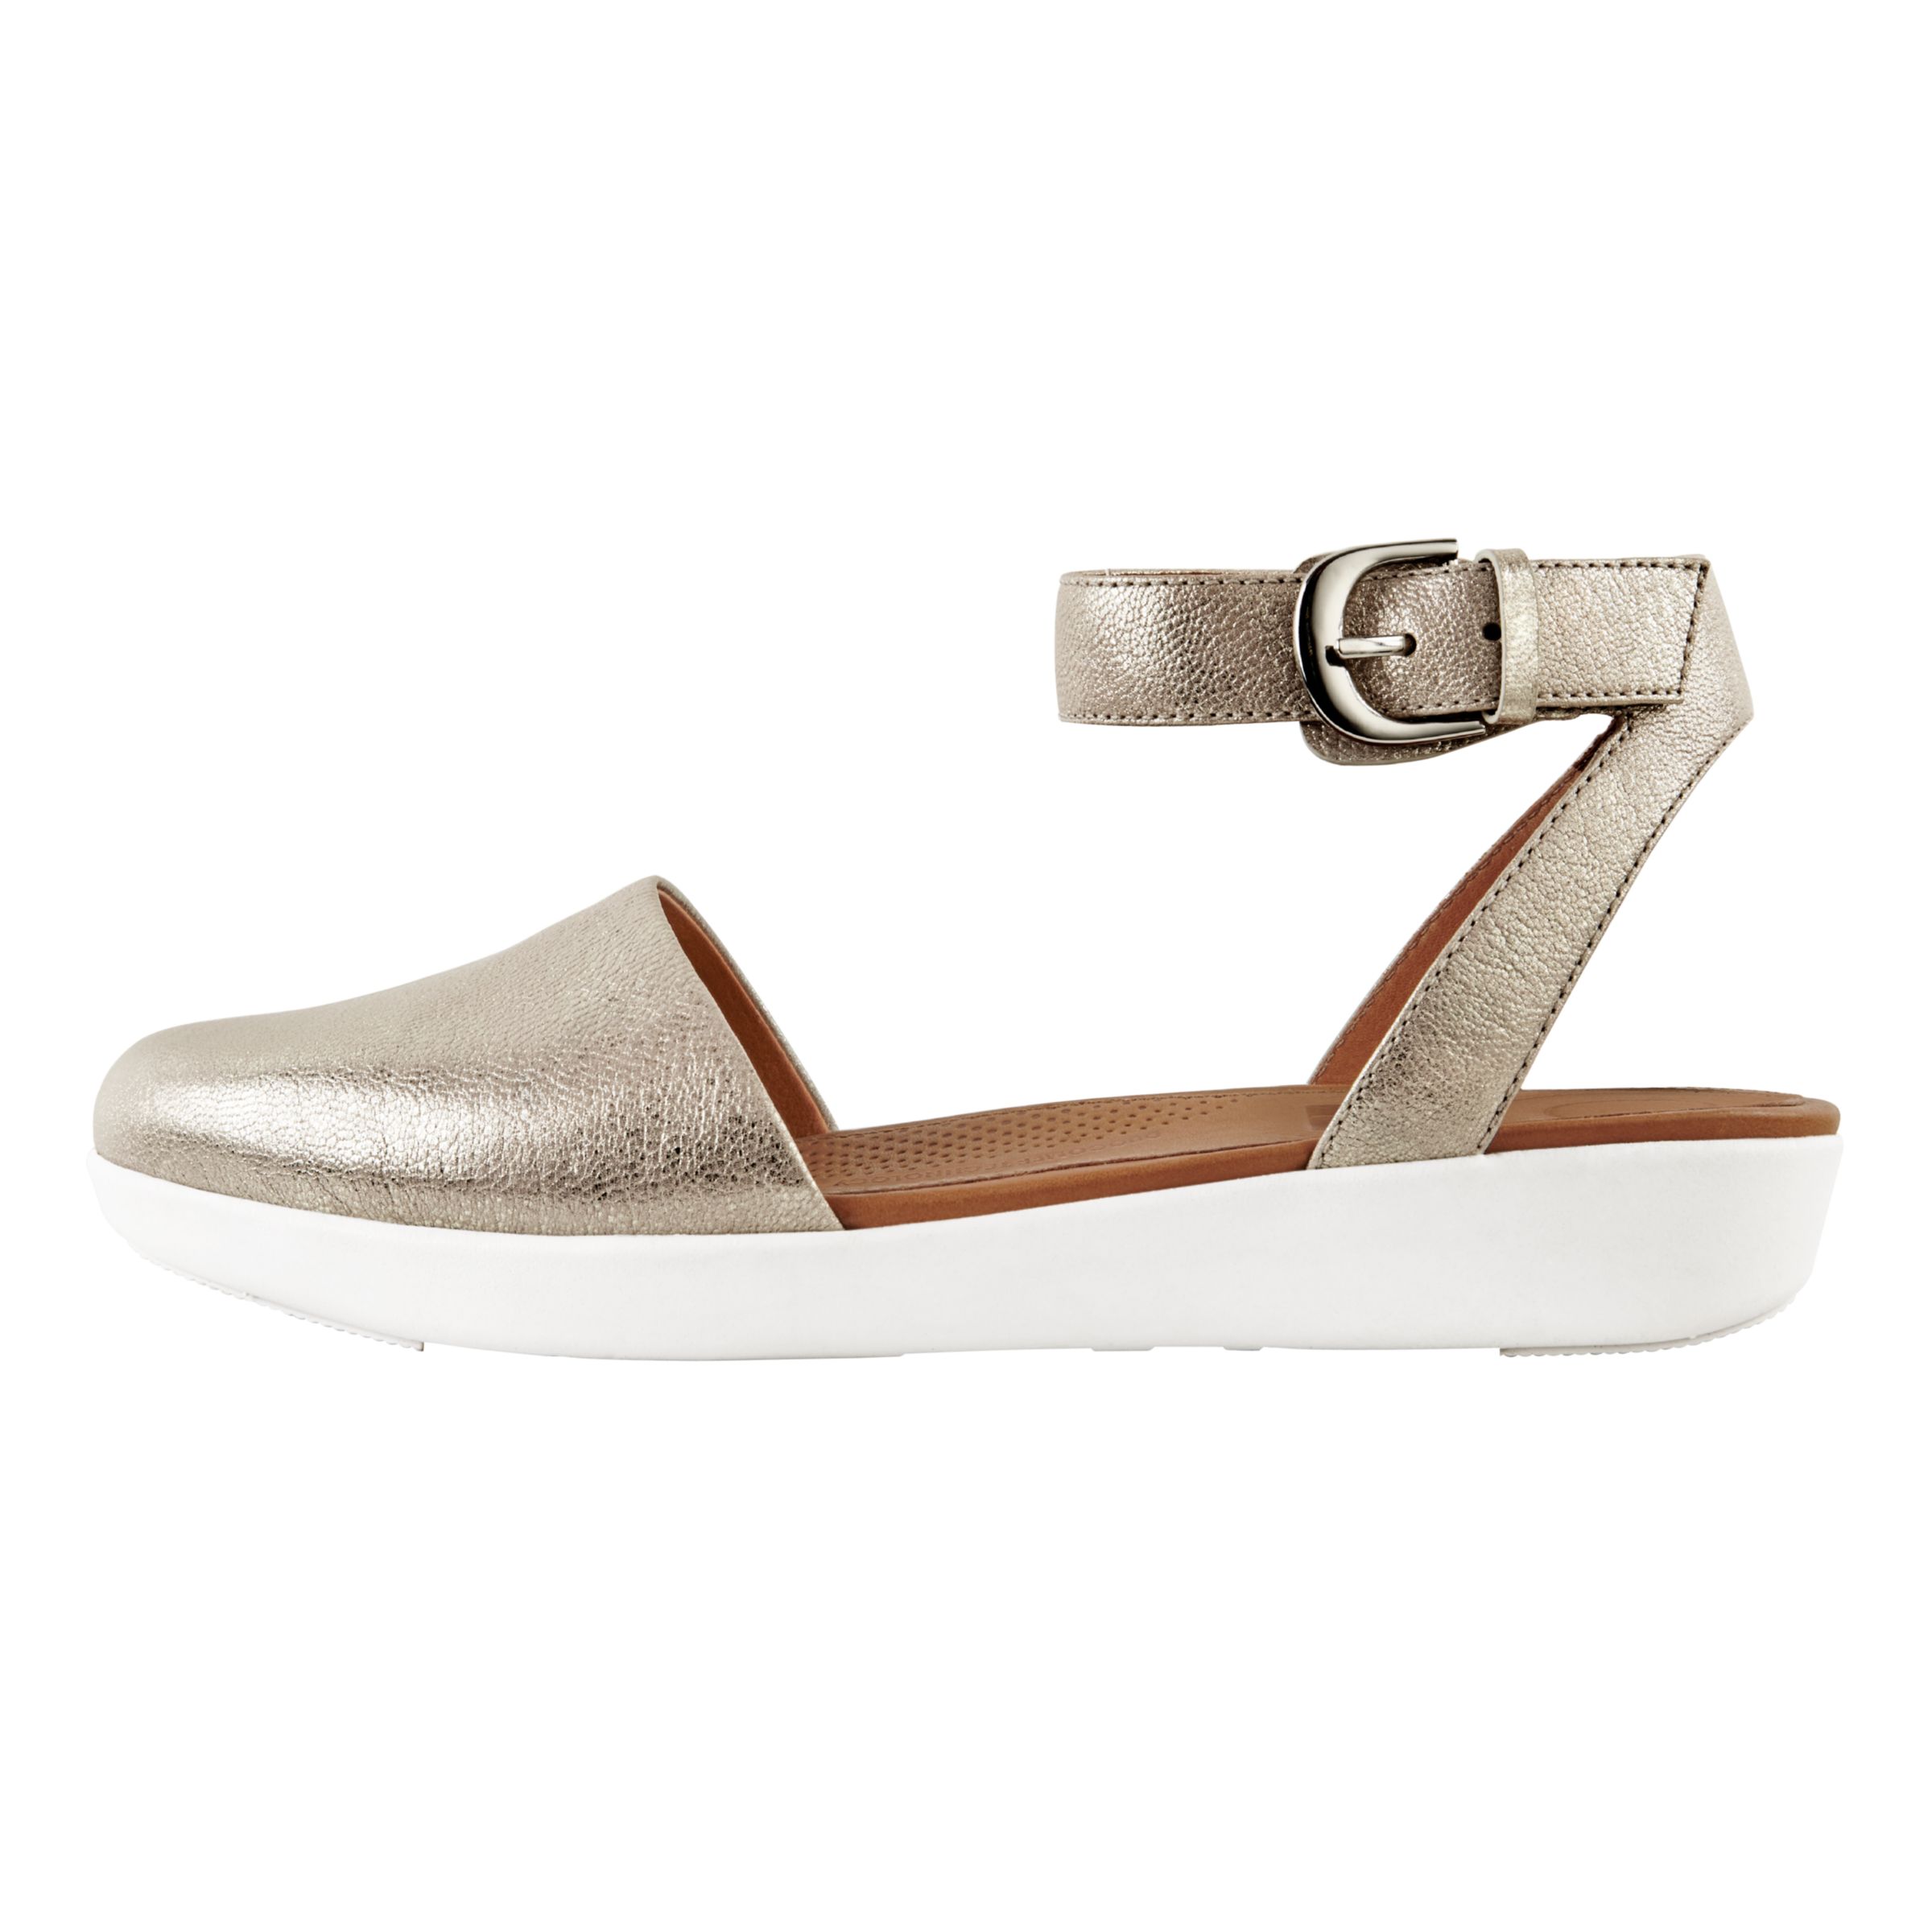 FitFlop Cova Closed Toe Sandals, Silver Leather